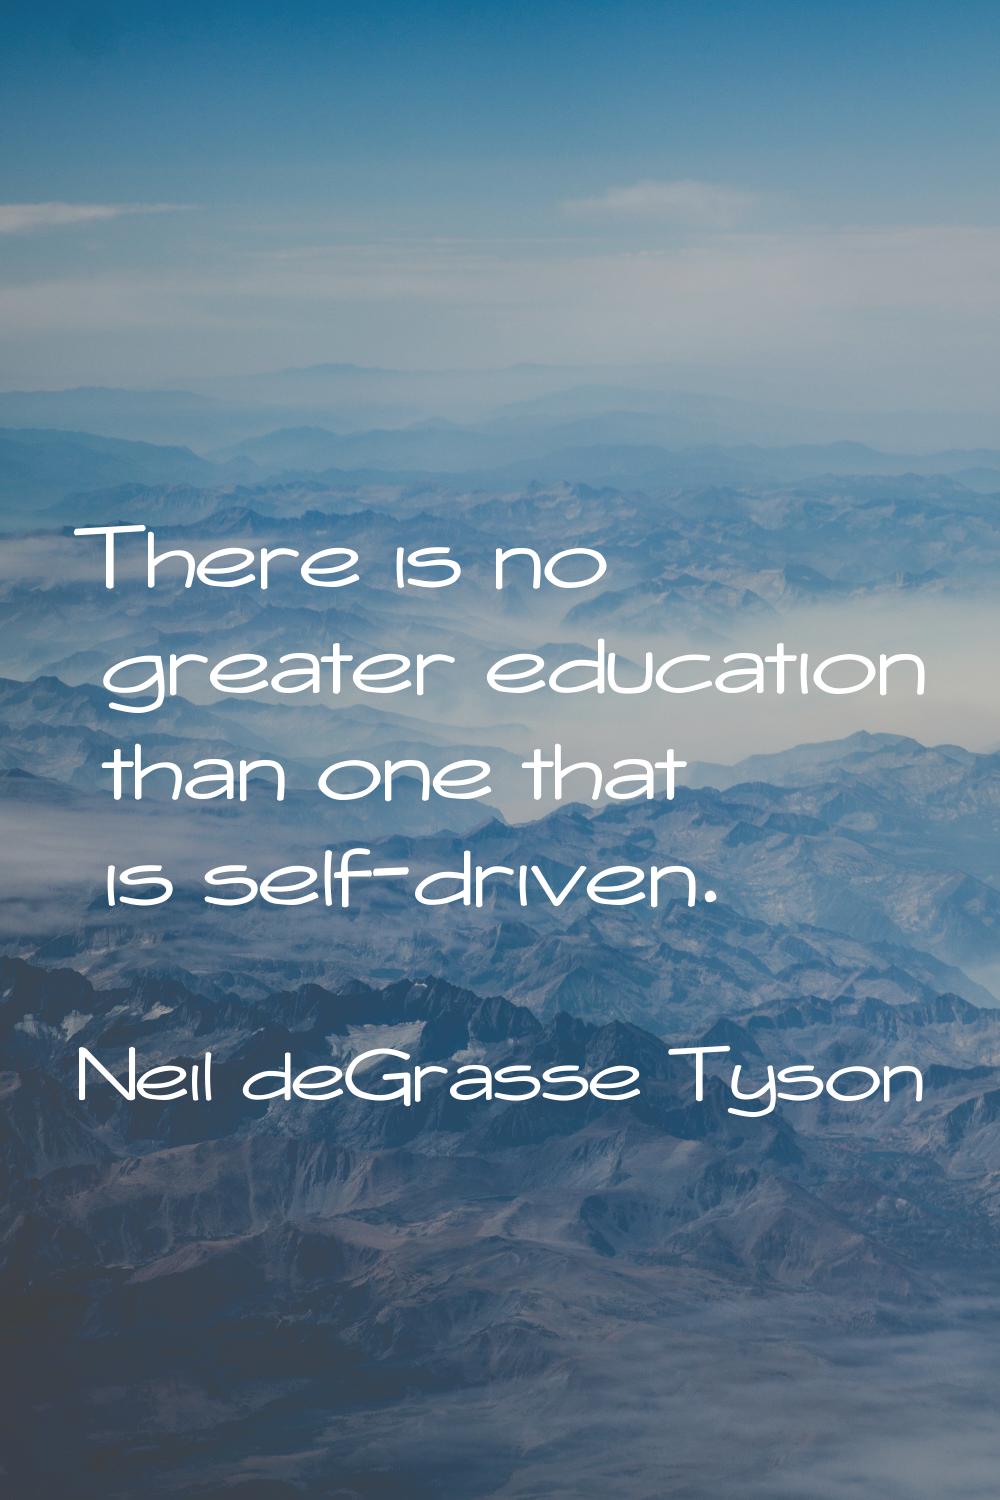 There is no greater education than one that is self-driven.